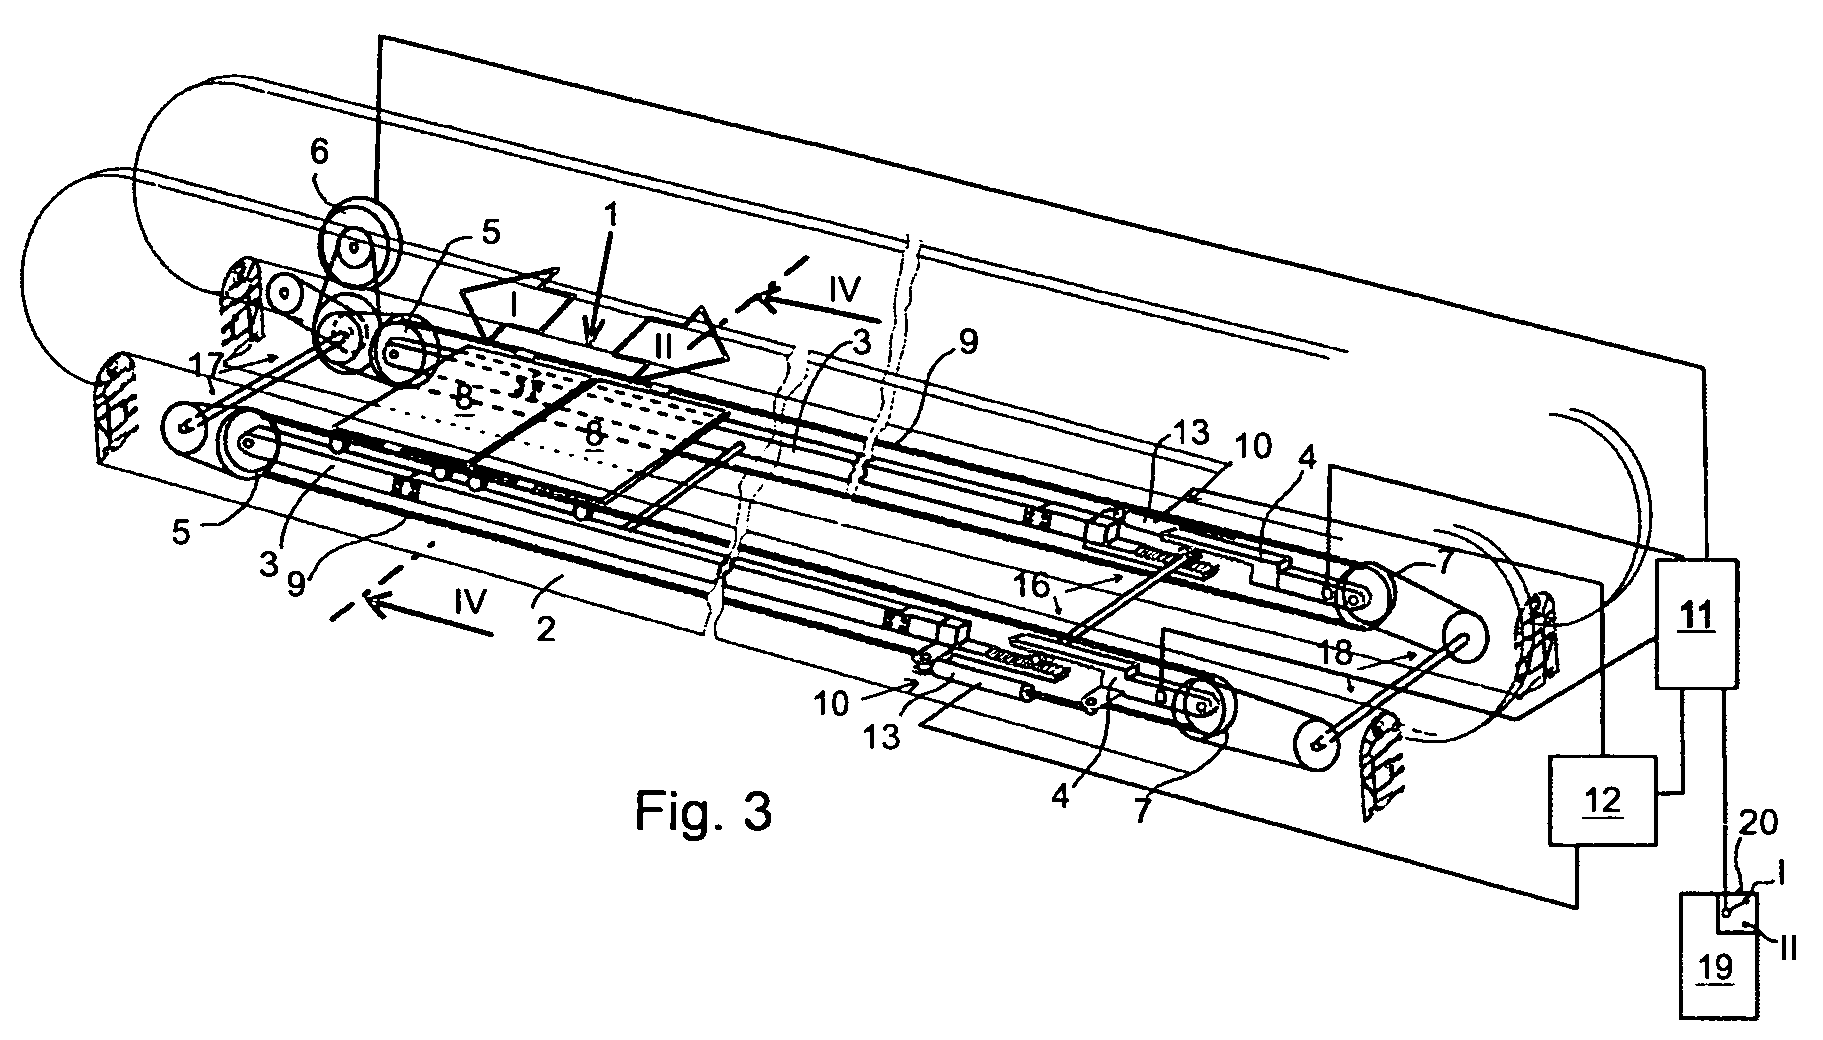 Travelator and method for controlling the operation of a travelator